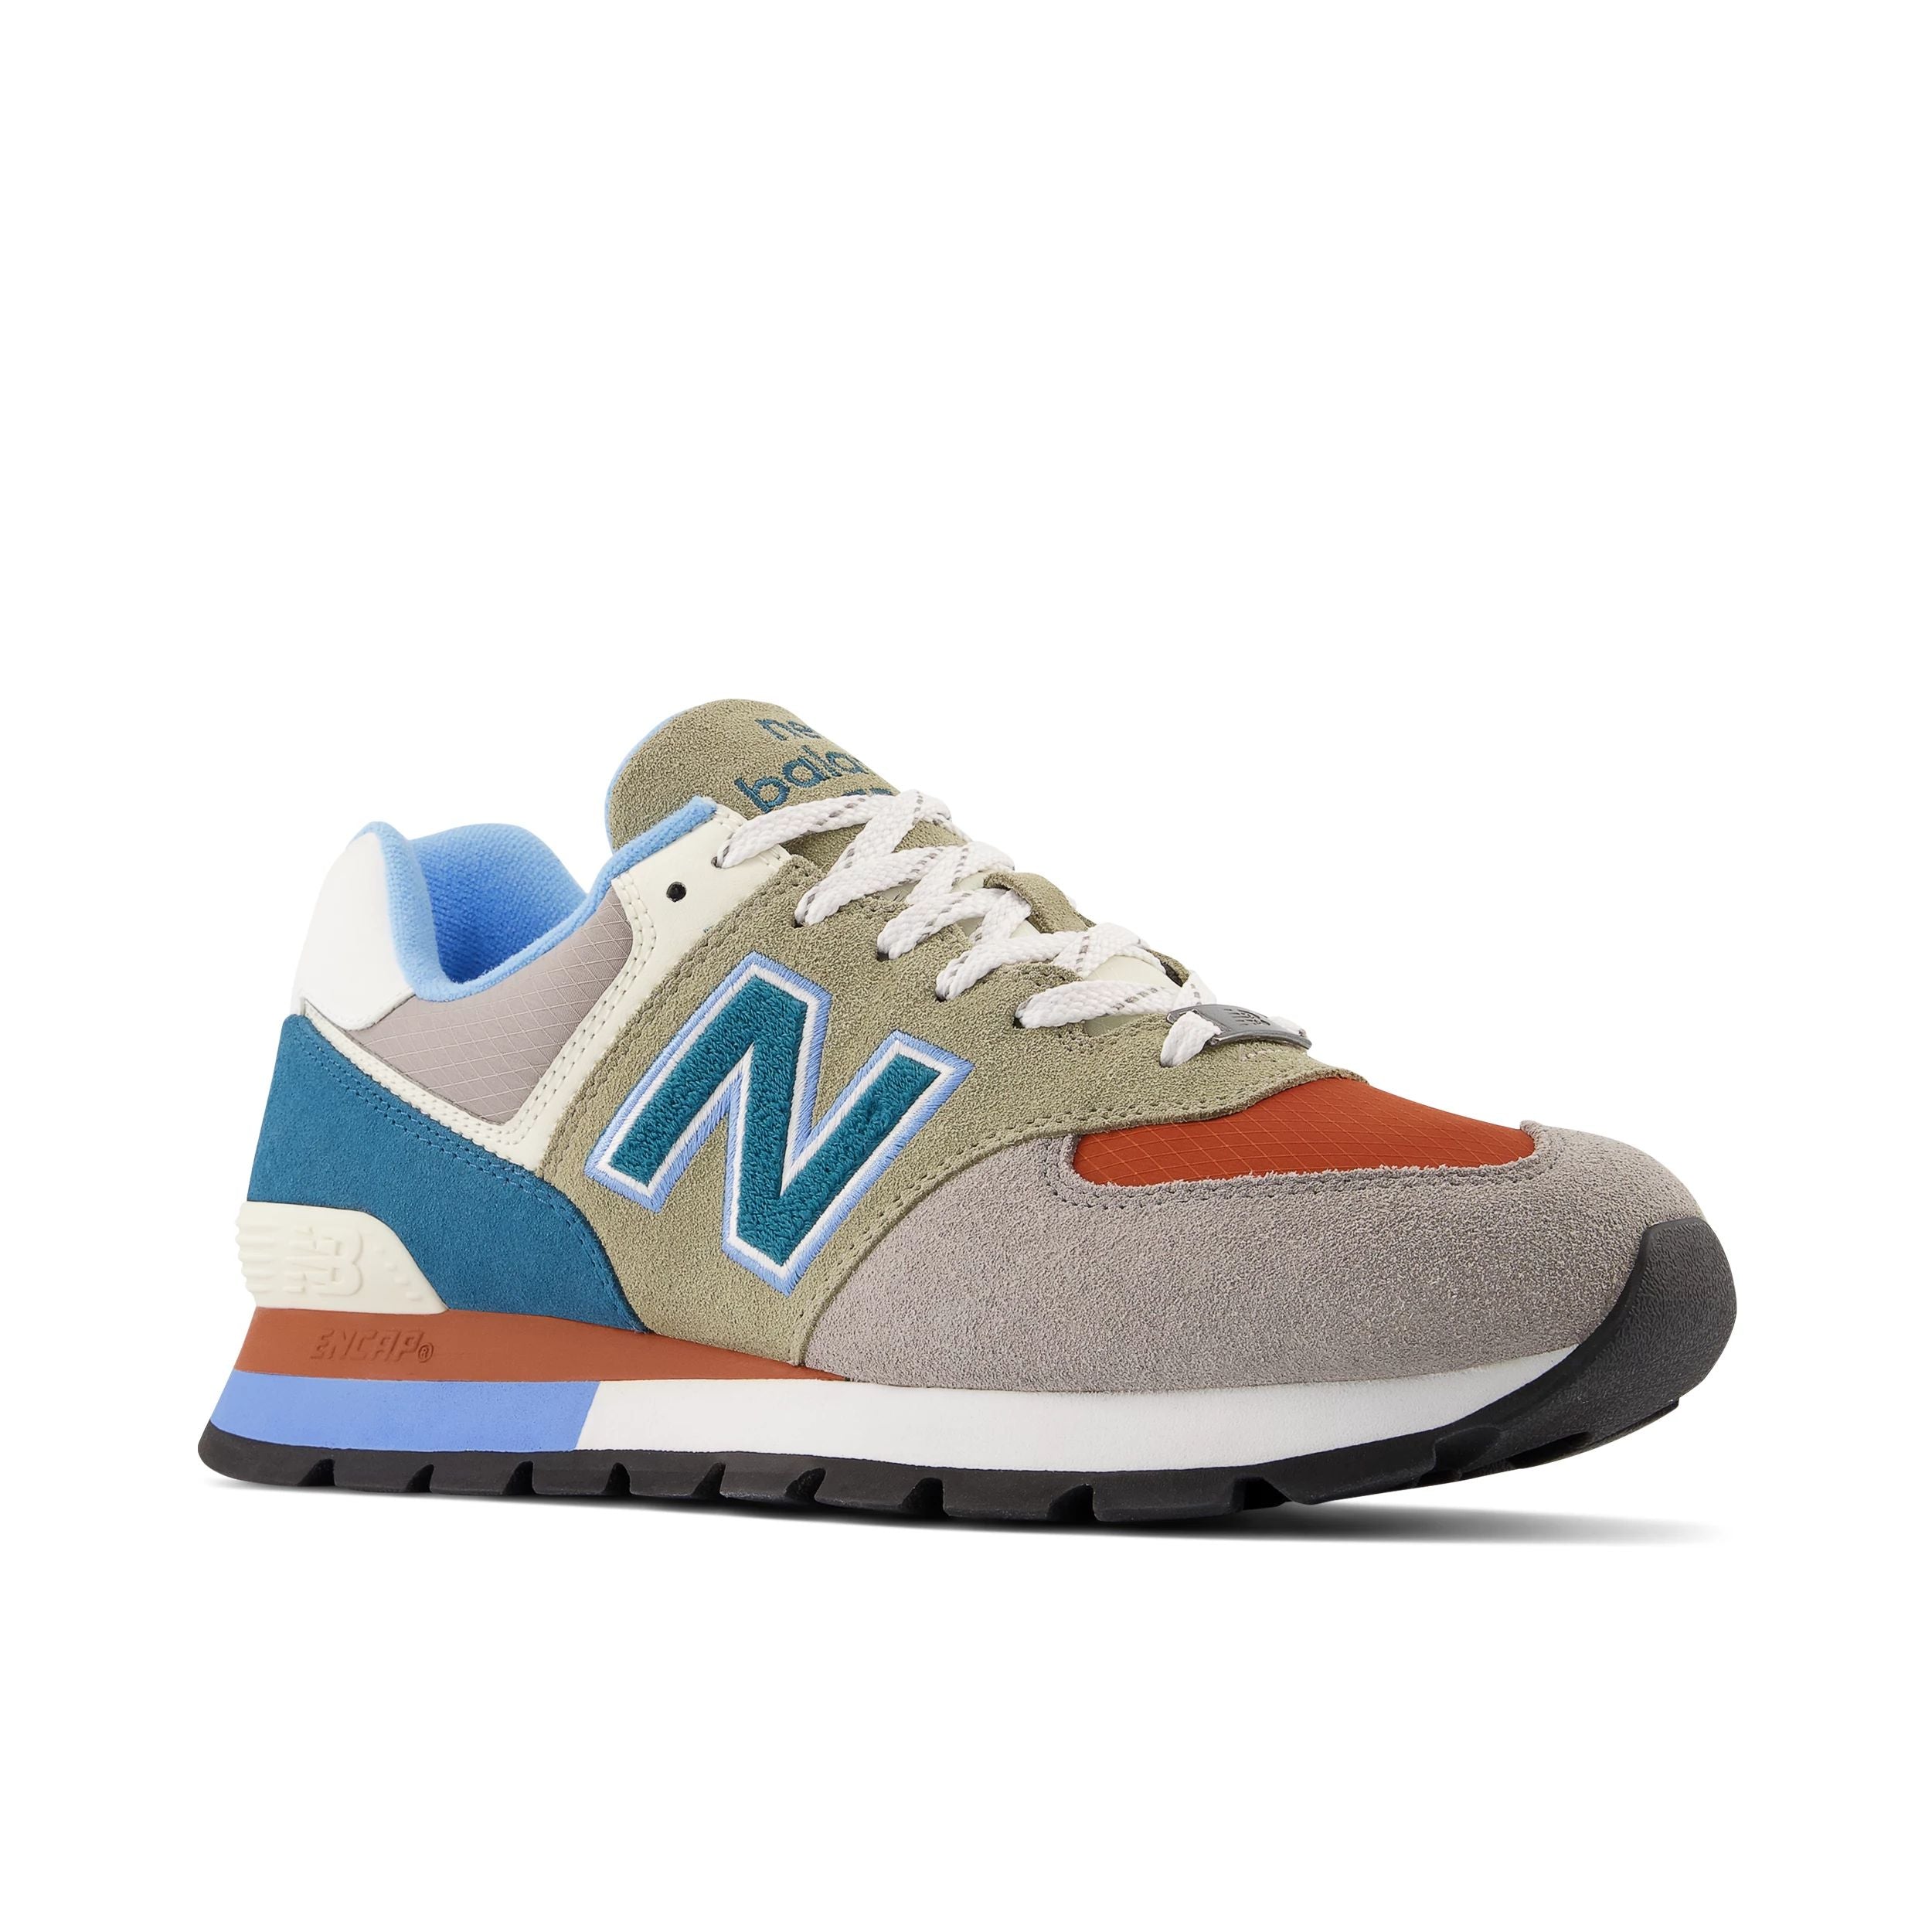 Front angle view of the Men's 574 by New Balance in the color Grey/Blue